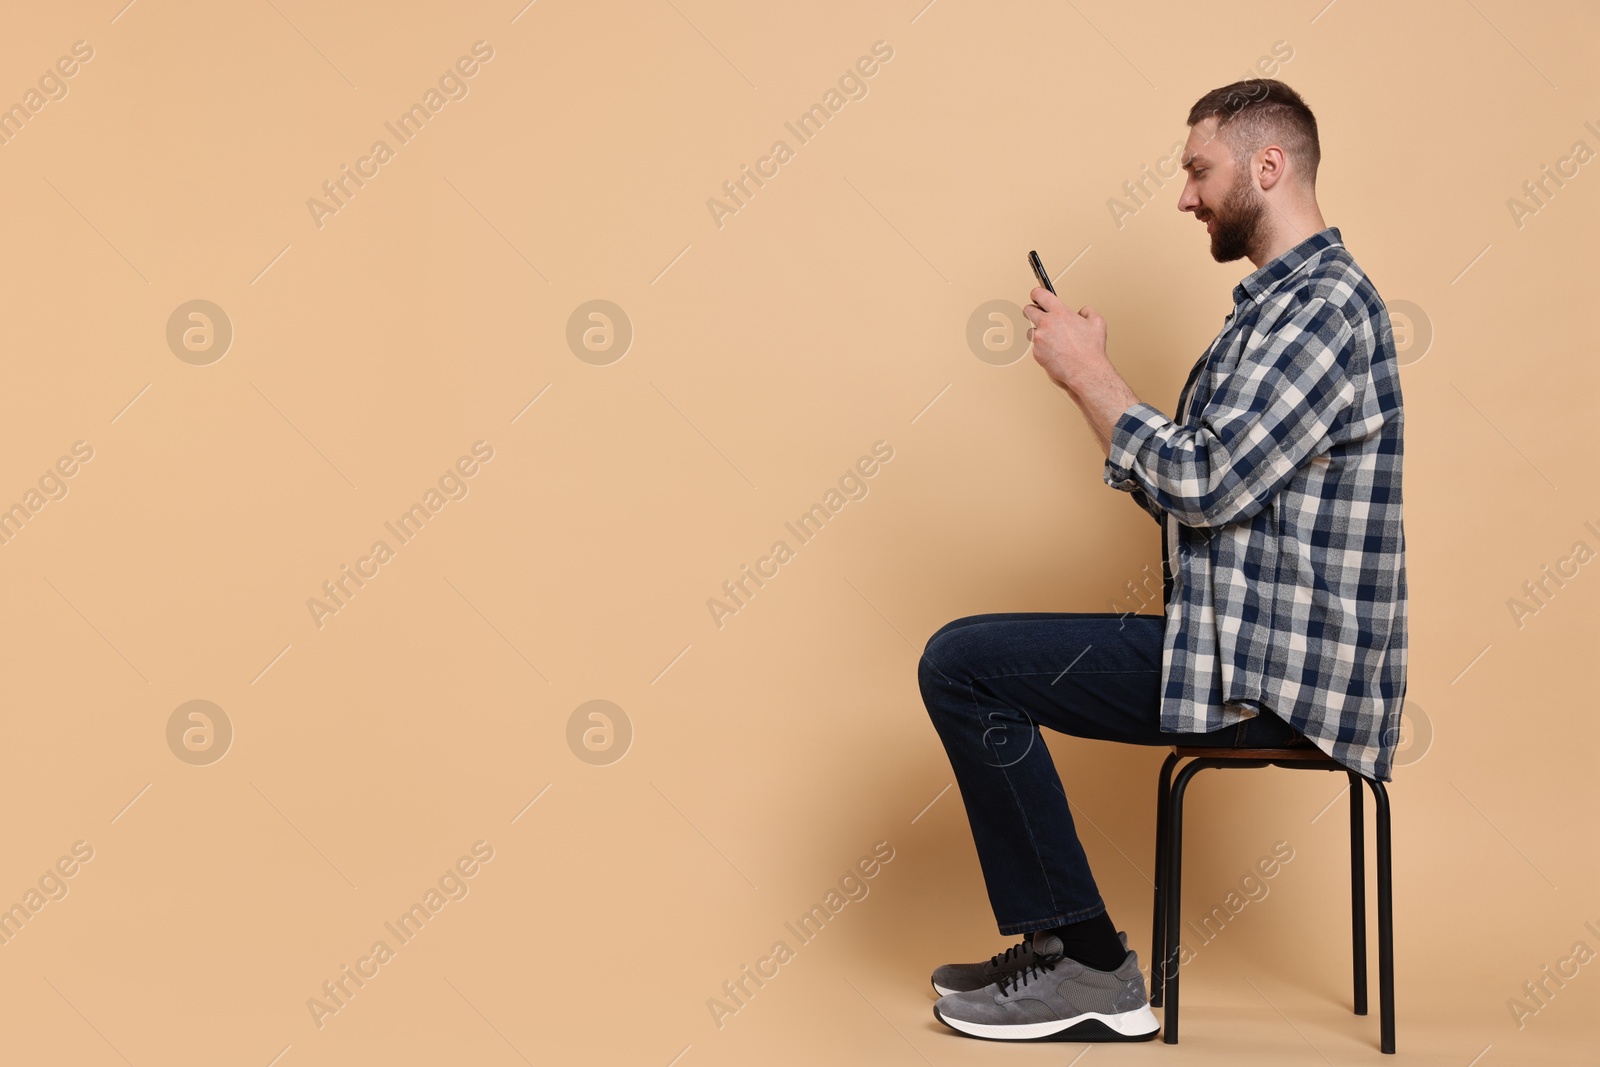 Photo of Man with good posture sitting on chair and using smartphone against pale orange background, space for text